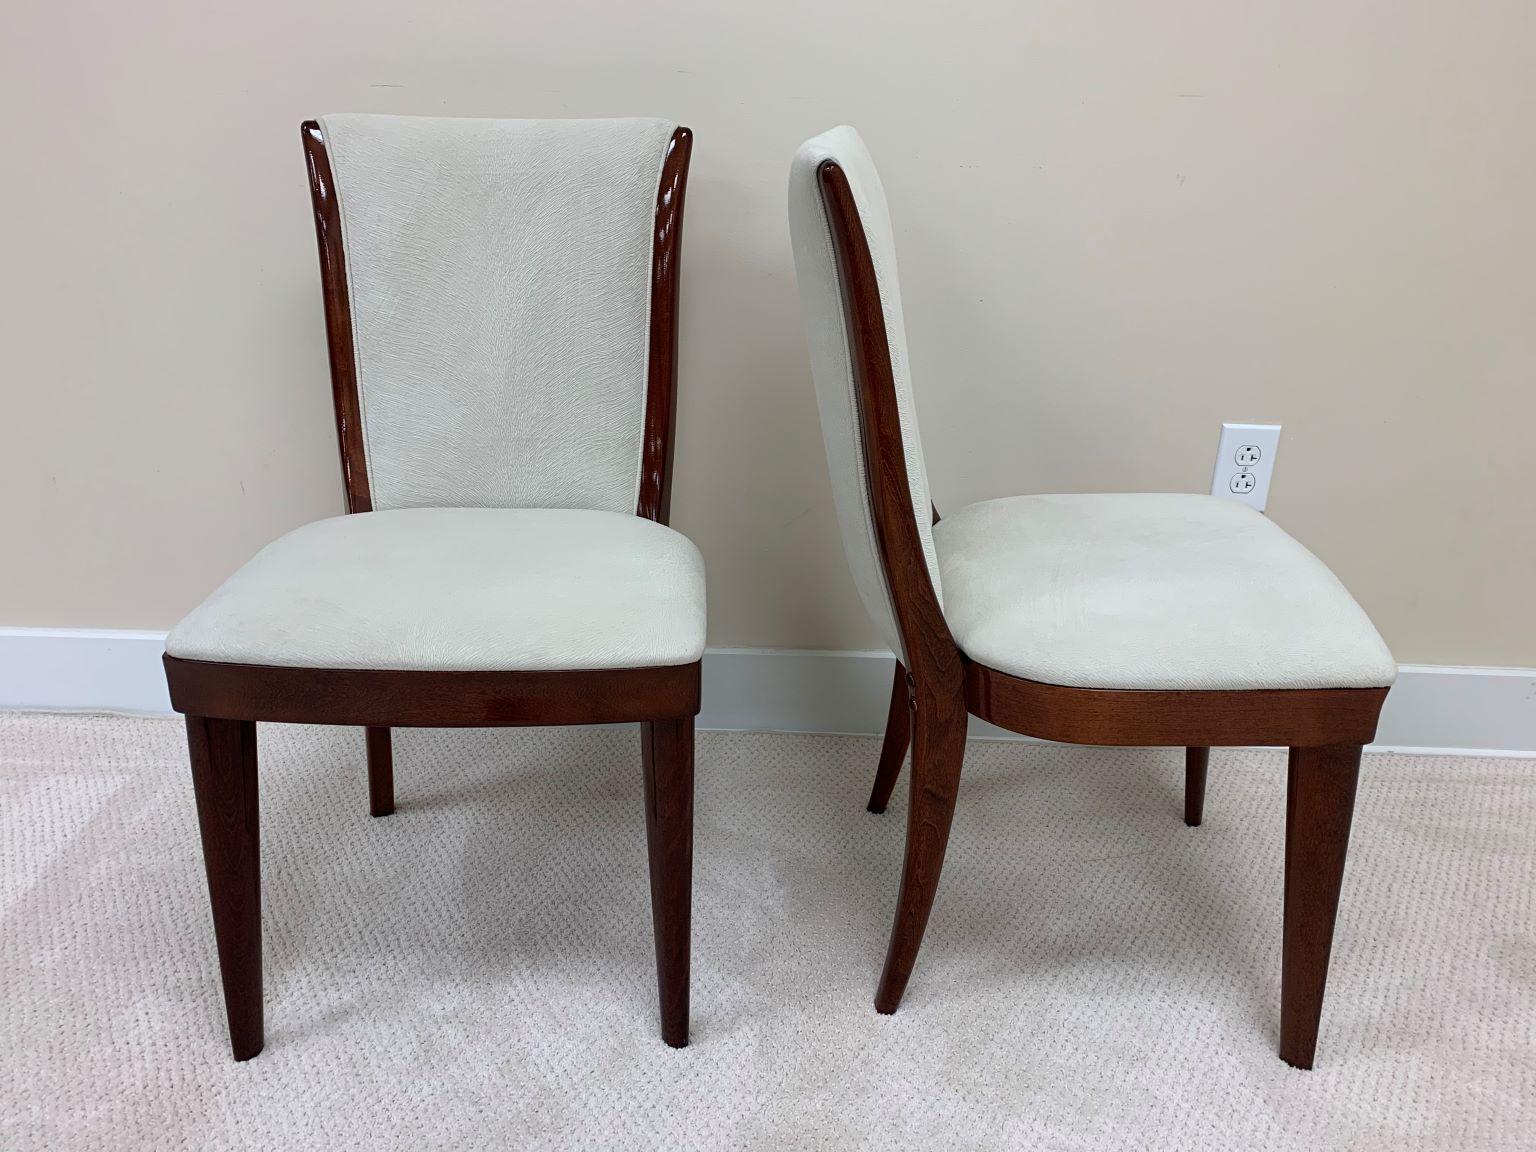 Set of six French style Art Deco streamline armless dining chairs. A very simple and elegant streamline design. The solid maple stained frames have been beautifully restored and the upholstery redone in off white faux pony skin. Dimensions: 33